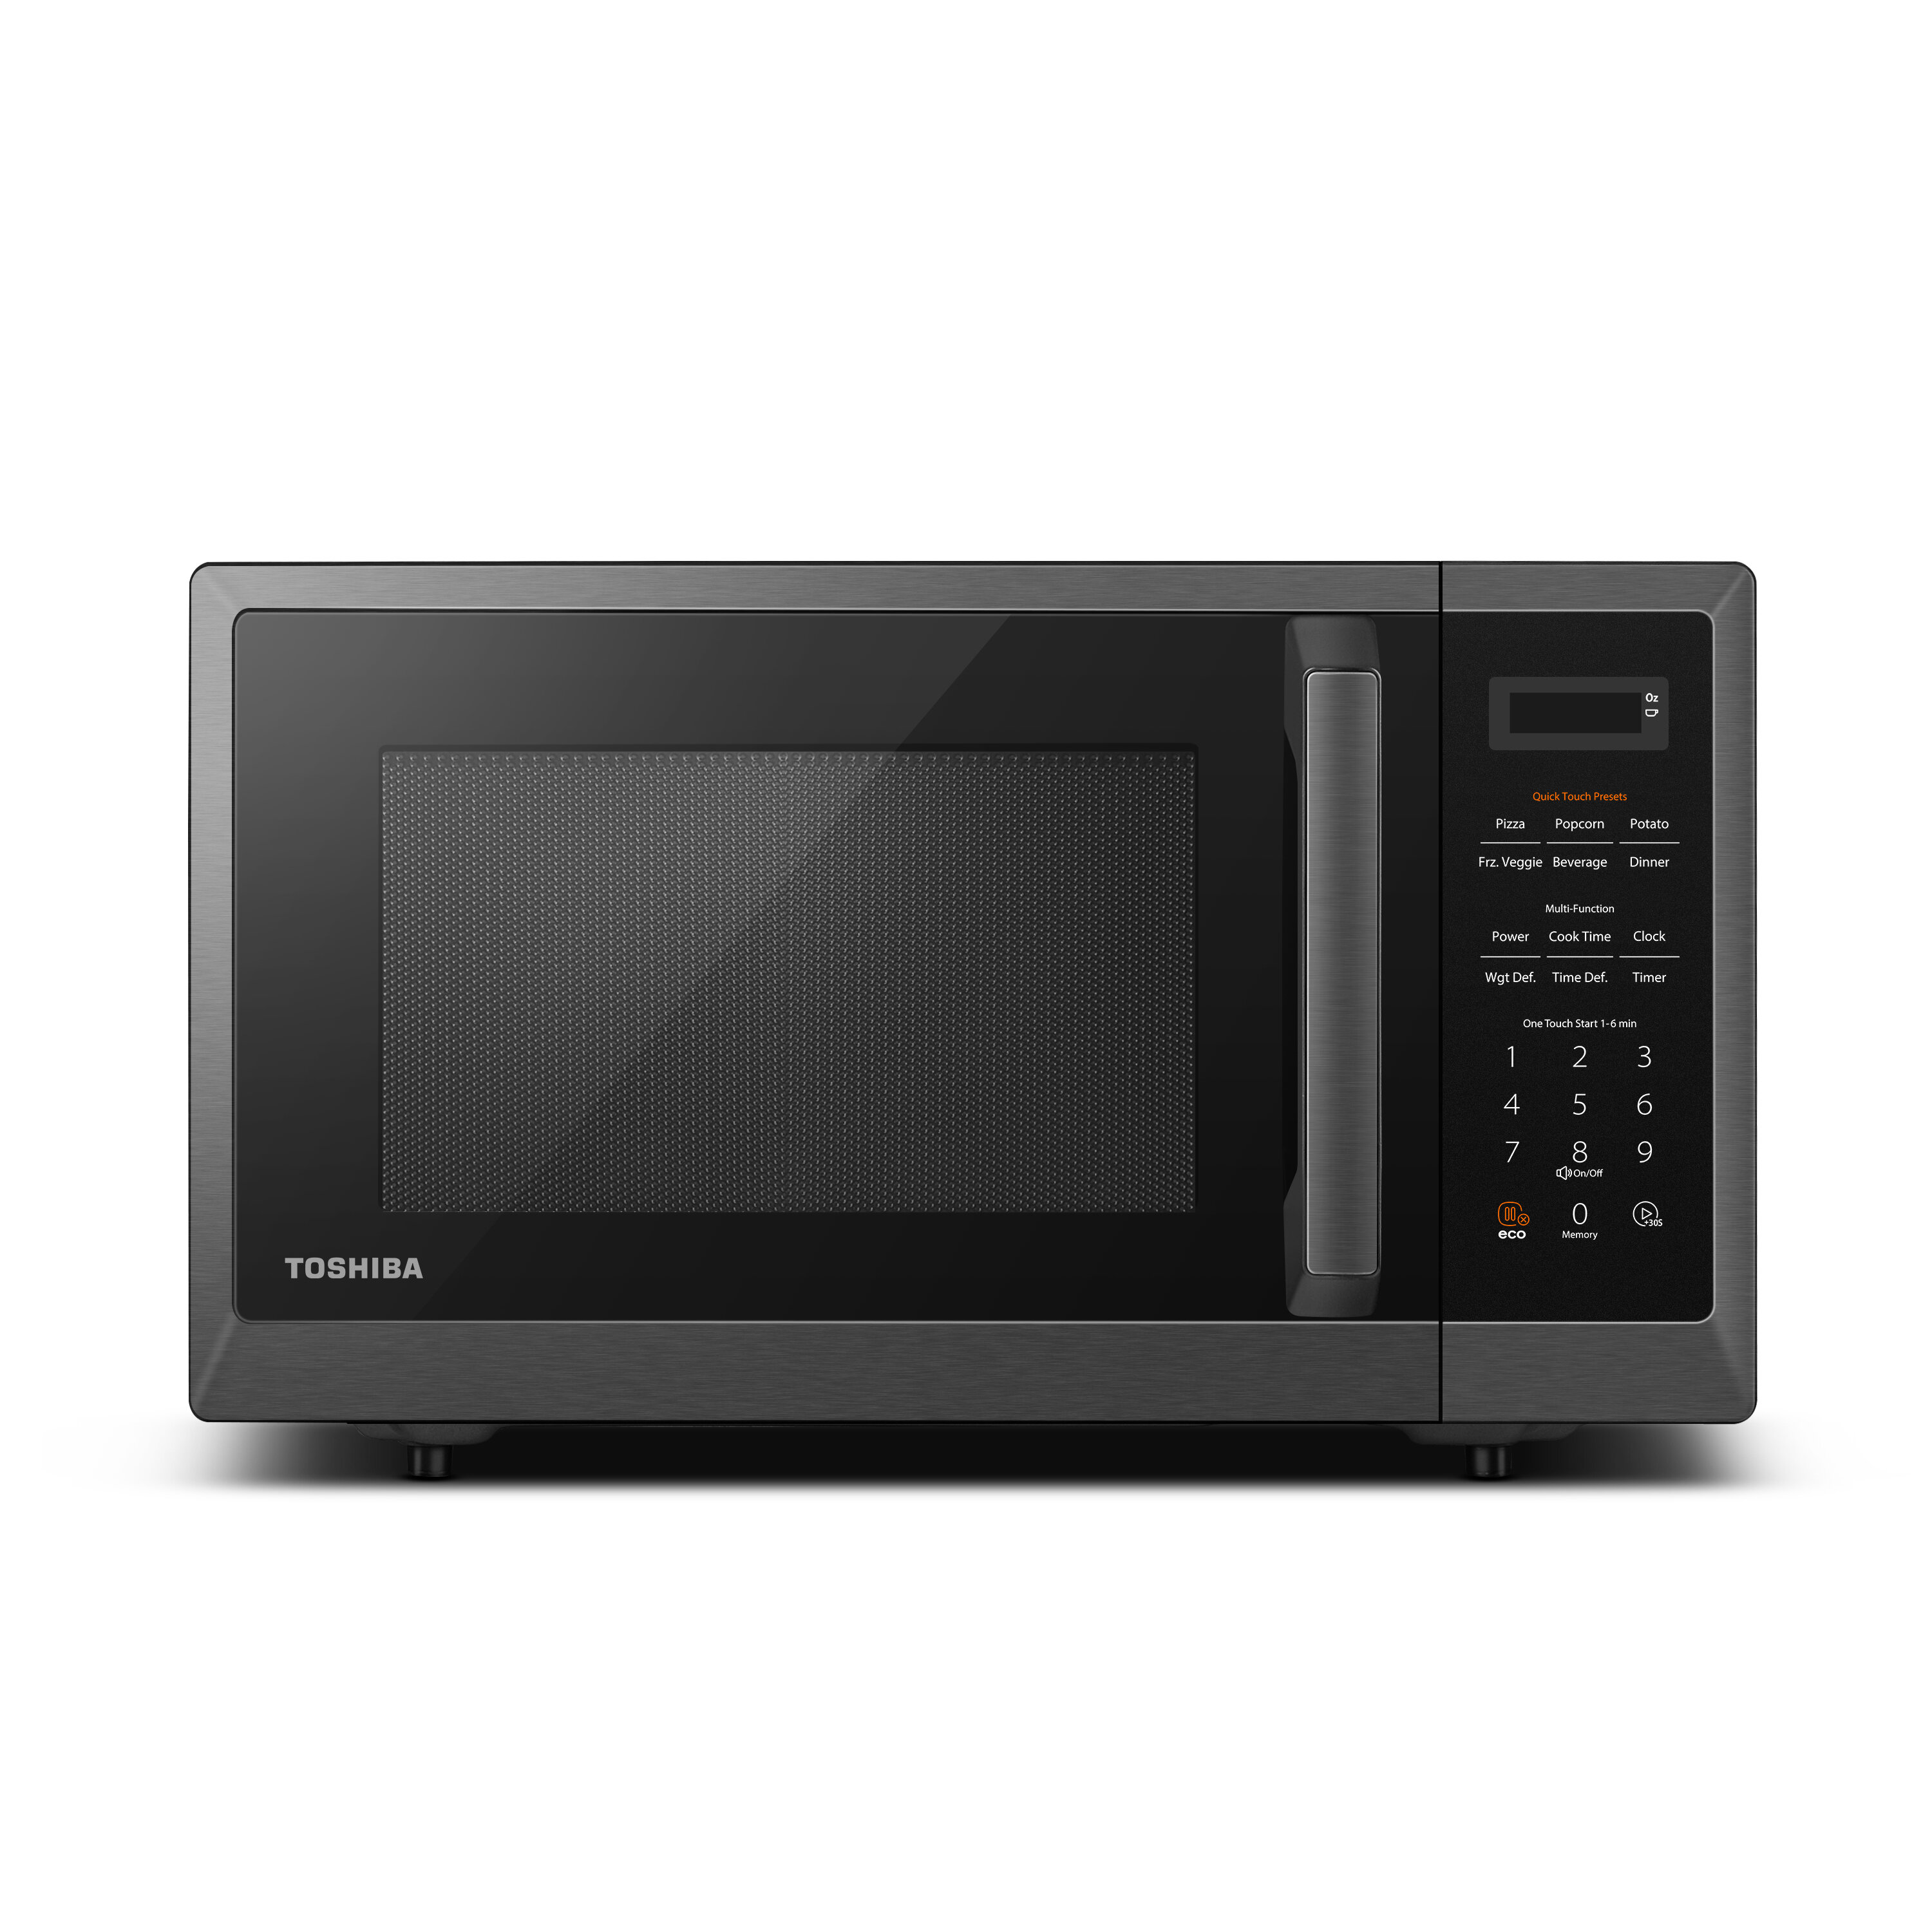 TOSHIBA 0.9 Cu Ft Small Countertop Microwave With 6 Auto Menus, Mute  Function,900W, Black Color